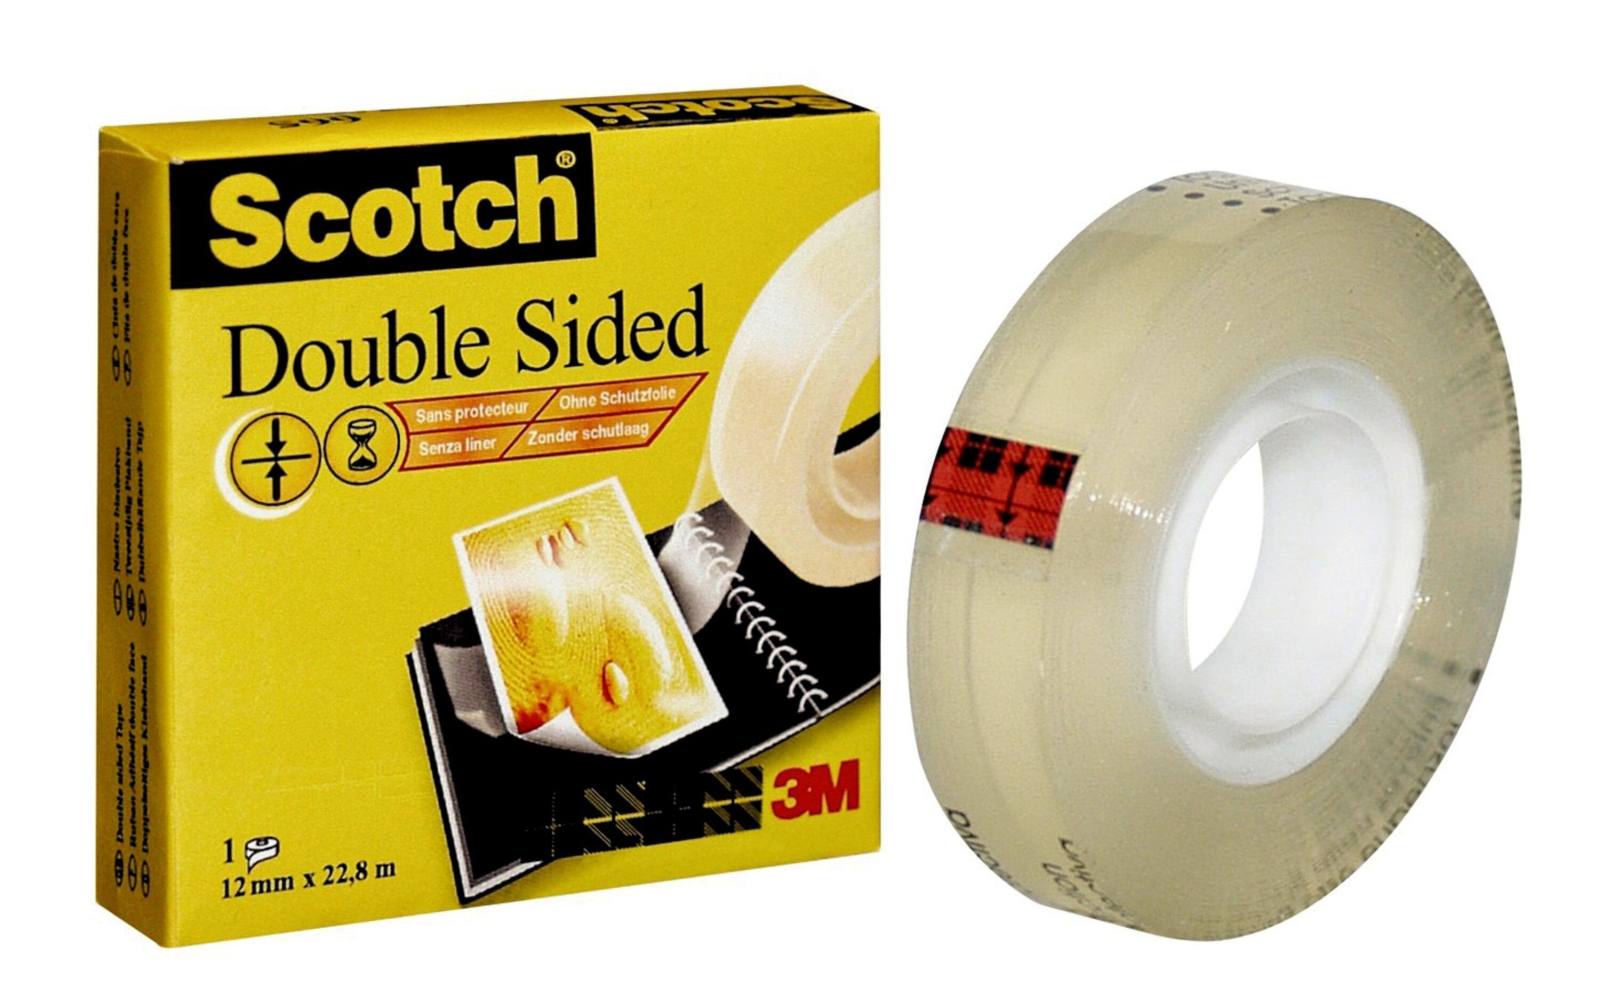 3M Scotch double-sided adhesive tape with 1 roll 12 mm x 22.8 m